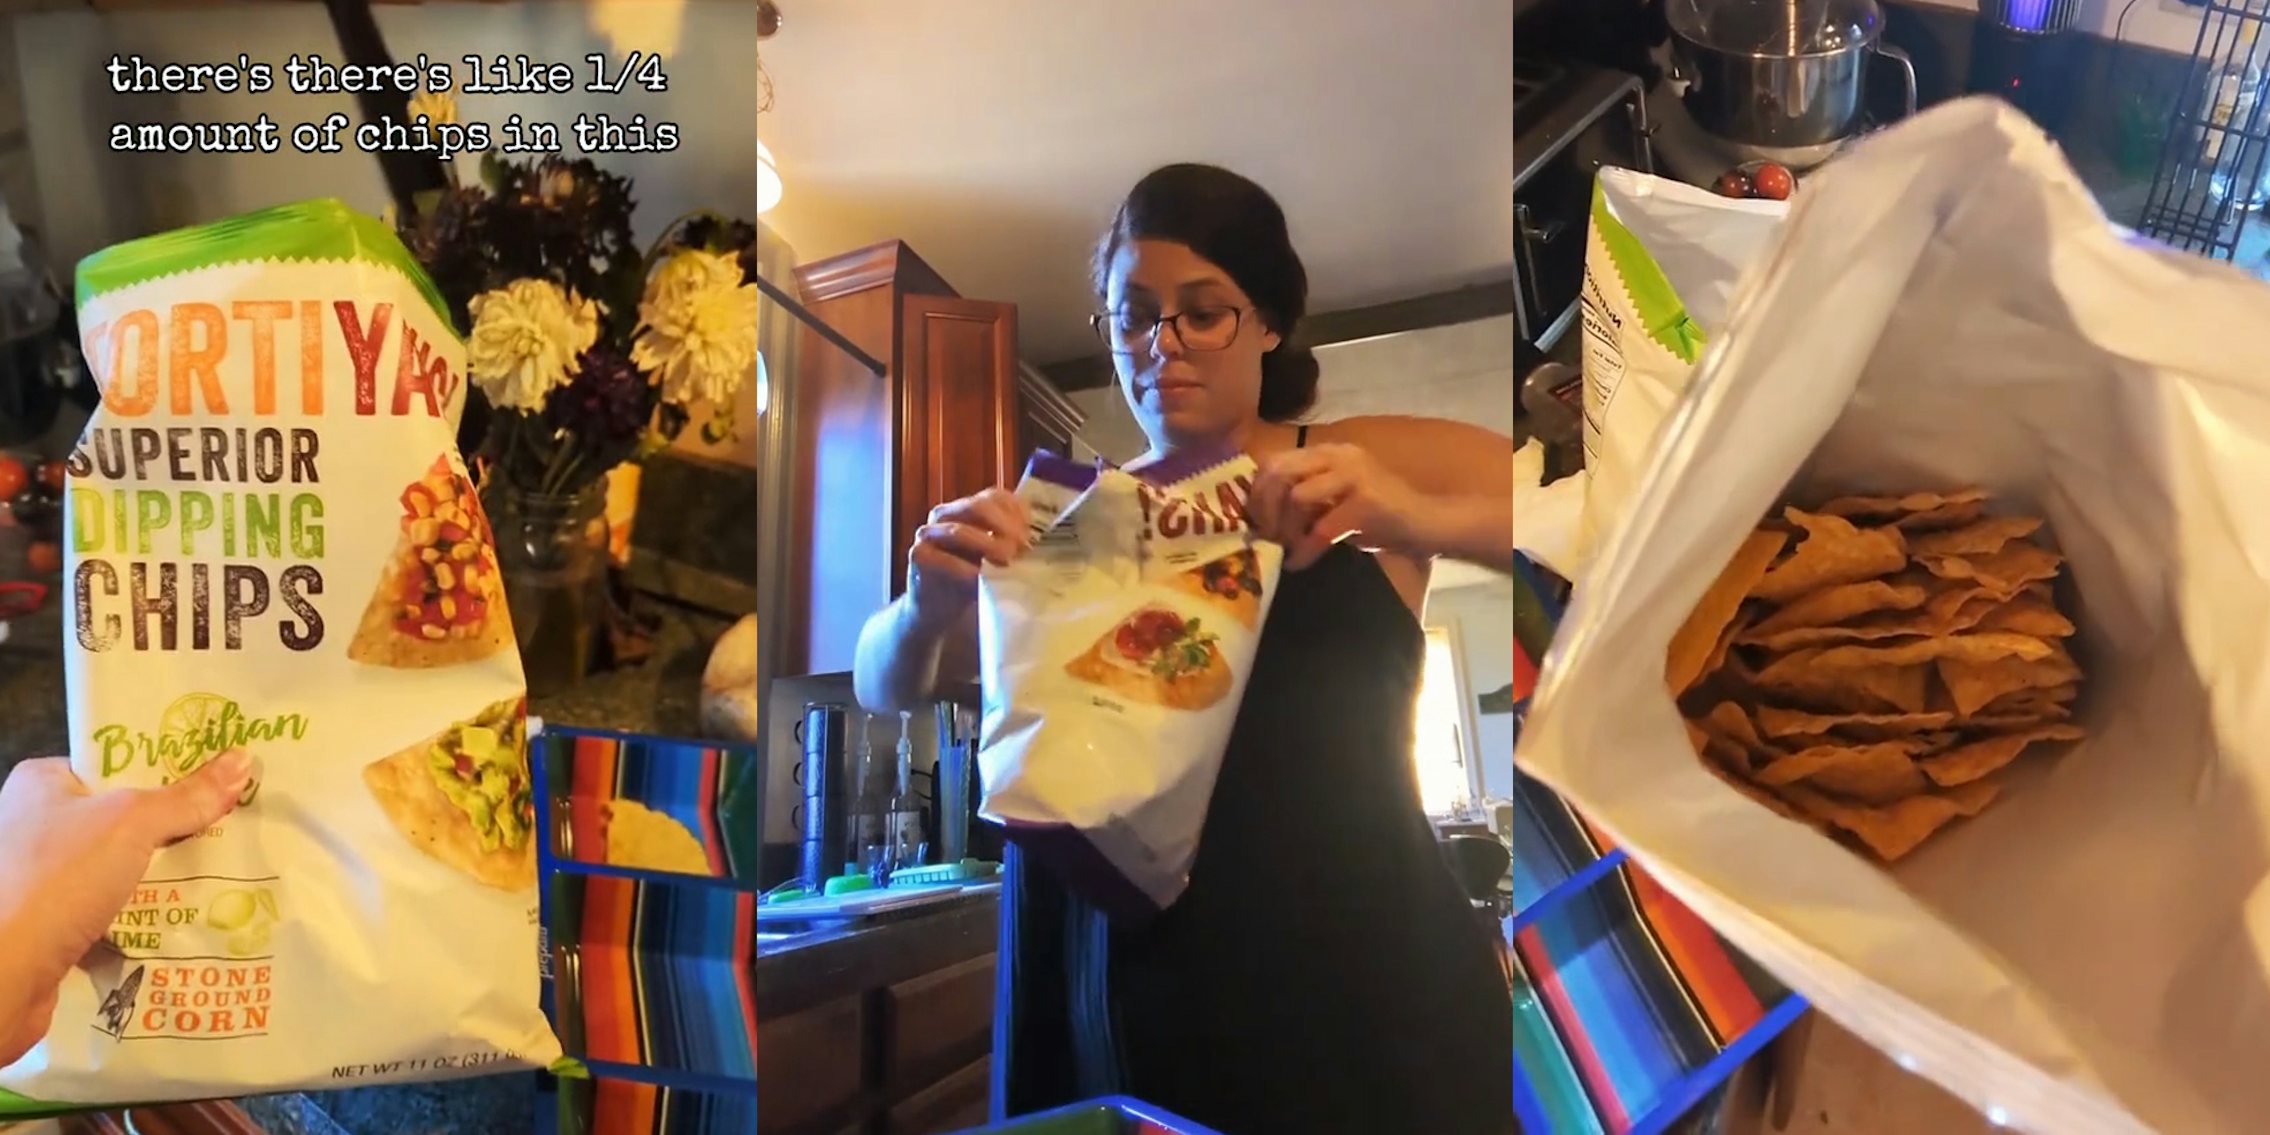 Tortiyahs! chip bag with caption 'there's like 1/4 amount of chips in this bag' (l) woman opening Tortiyahs! bag of chips (c) Tortiyahs! chip bag open (r)